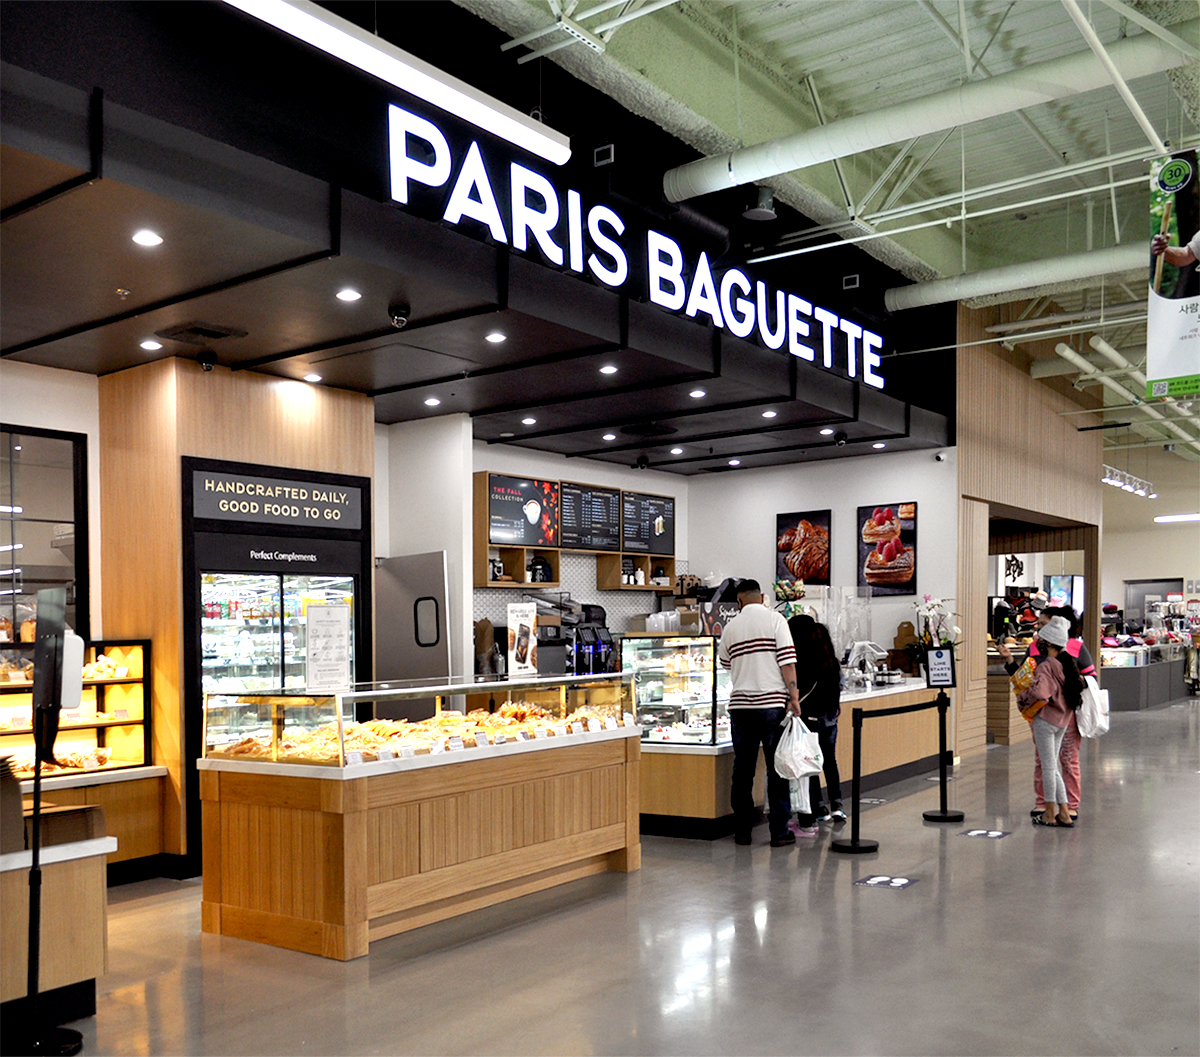 A building interior picture of paris baguette store. Bread display cases at the front and casher counter behind. Concrete floor and black ceiling.